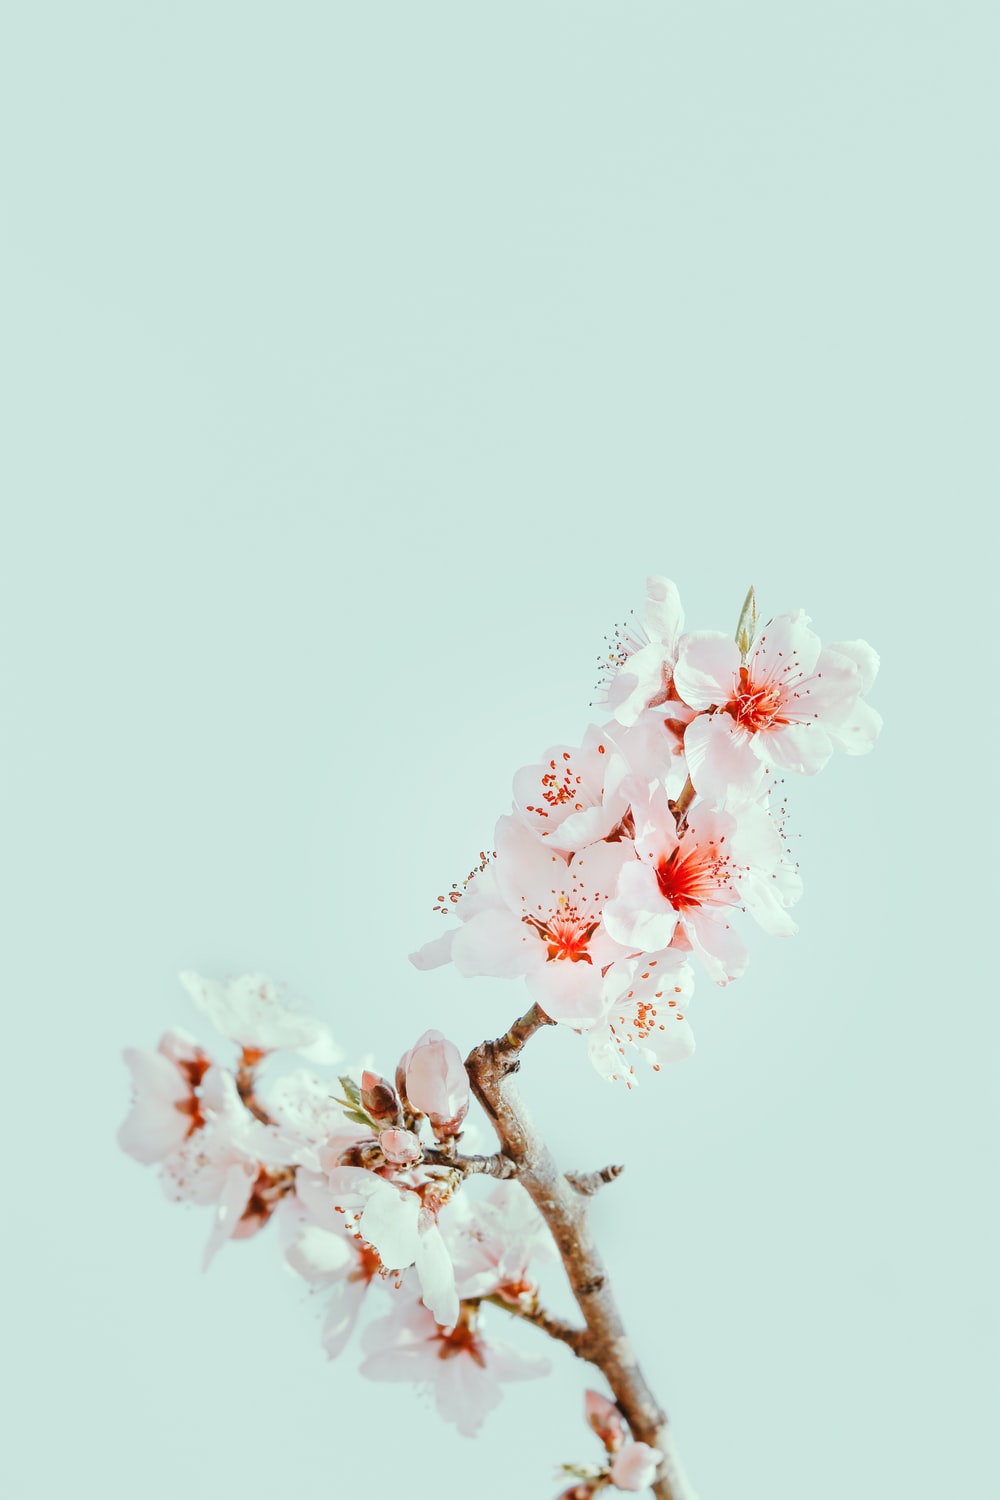 500+] Cherry Blossom Wallpapers